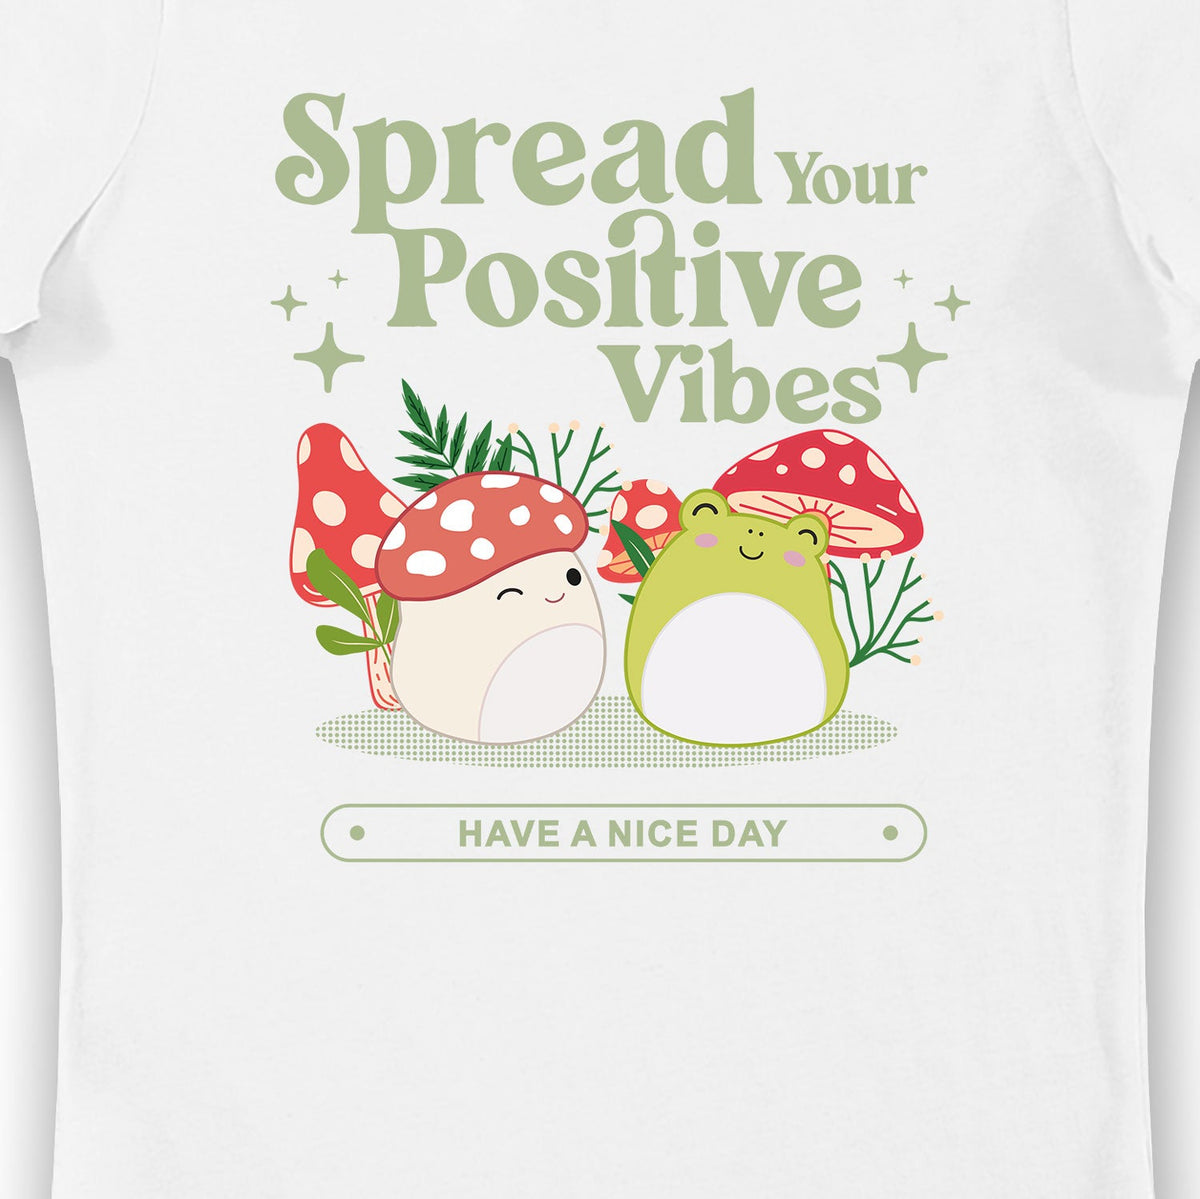 Squishmallows Spread Positive Vibes Ladies Adult T-Shirt White